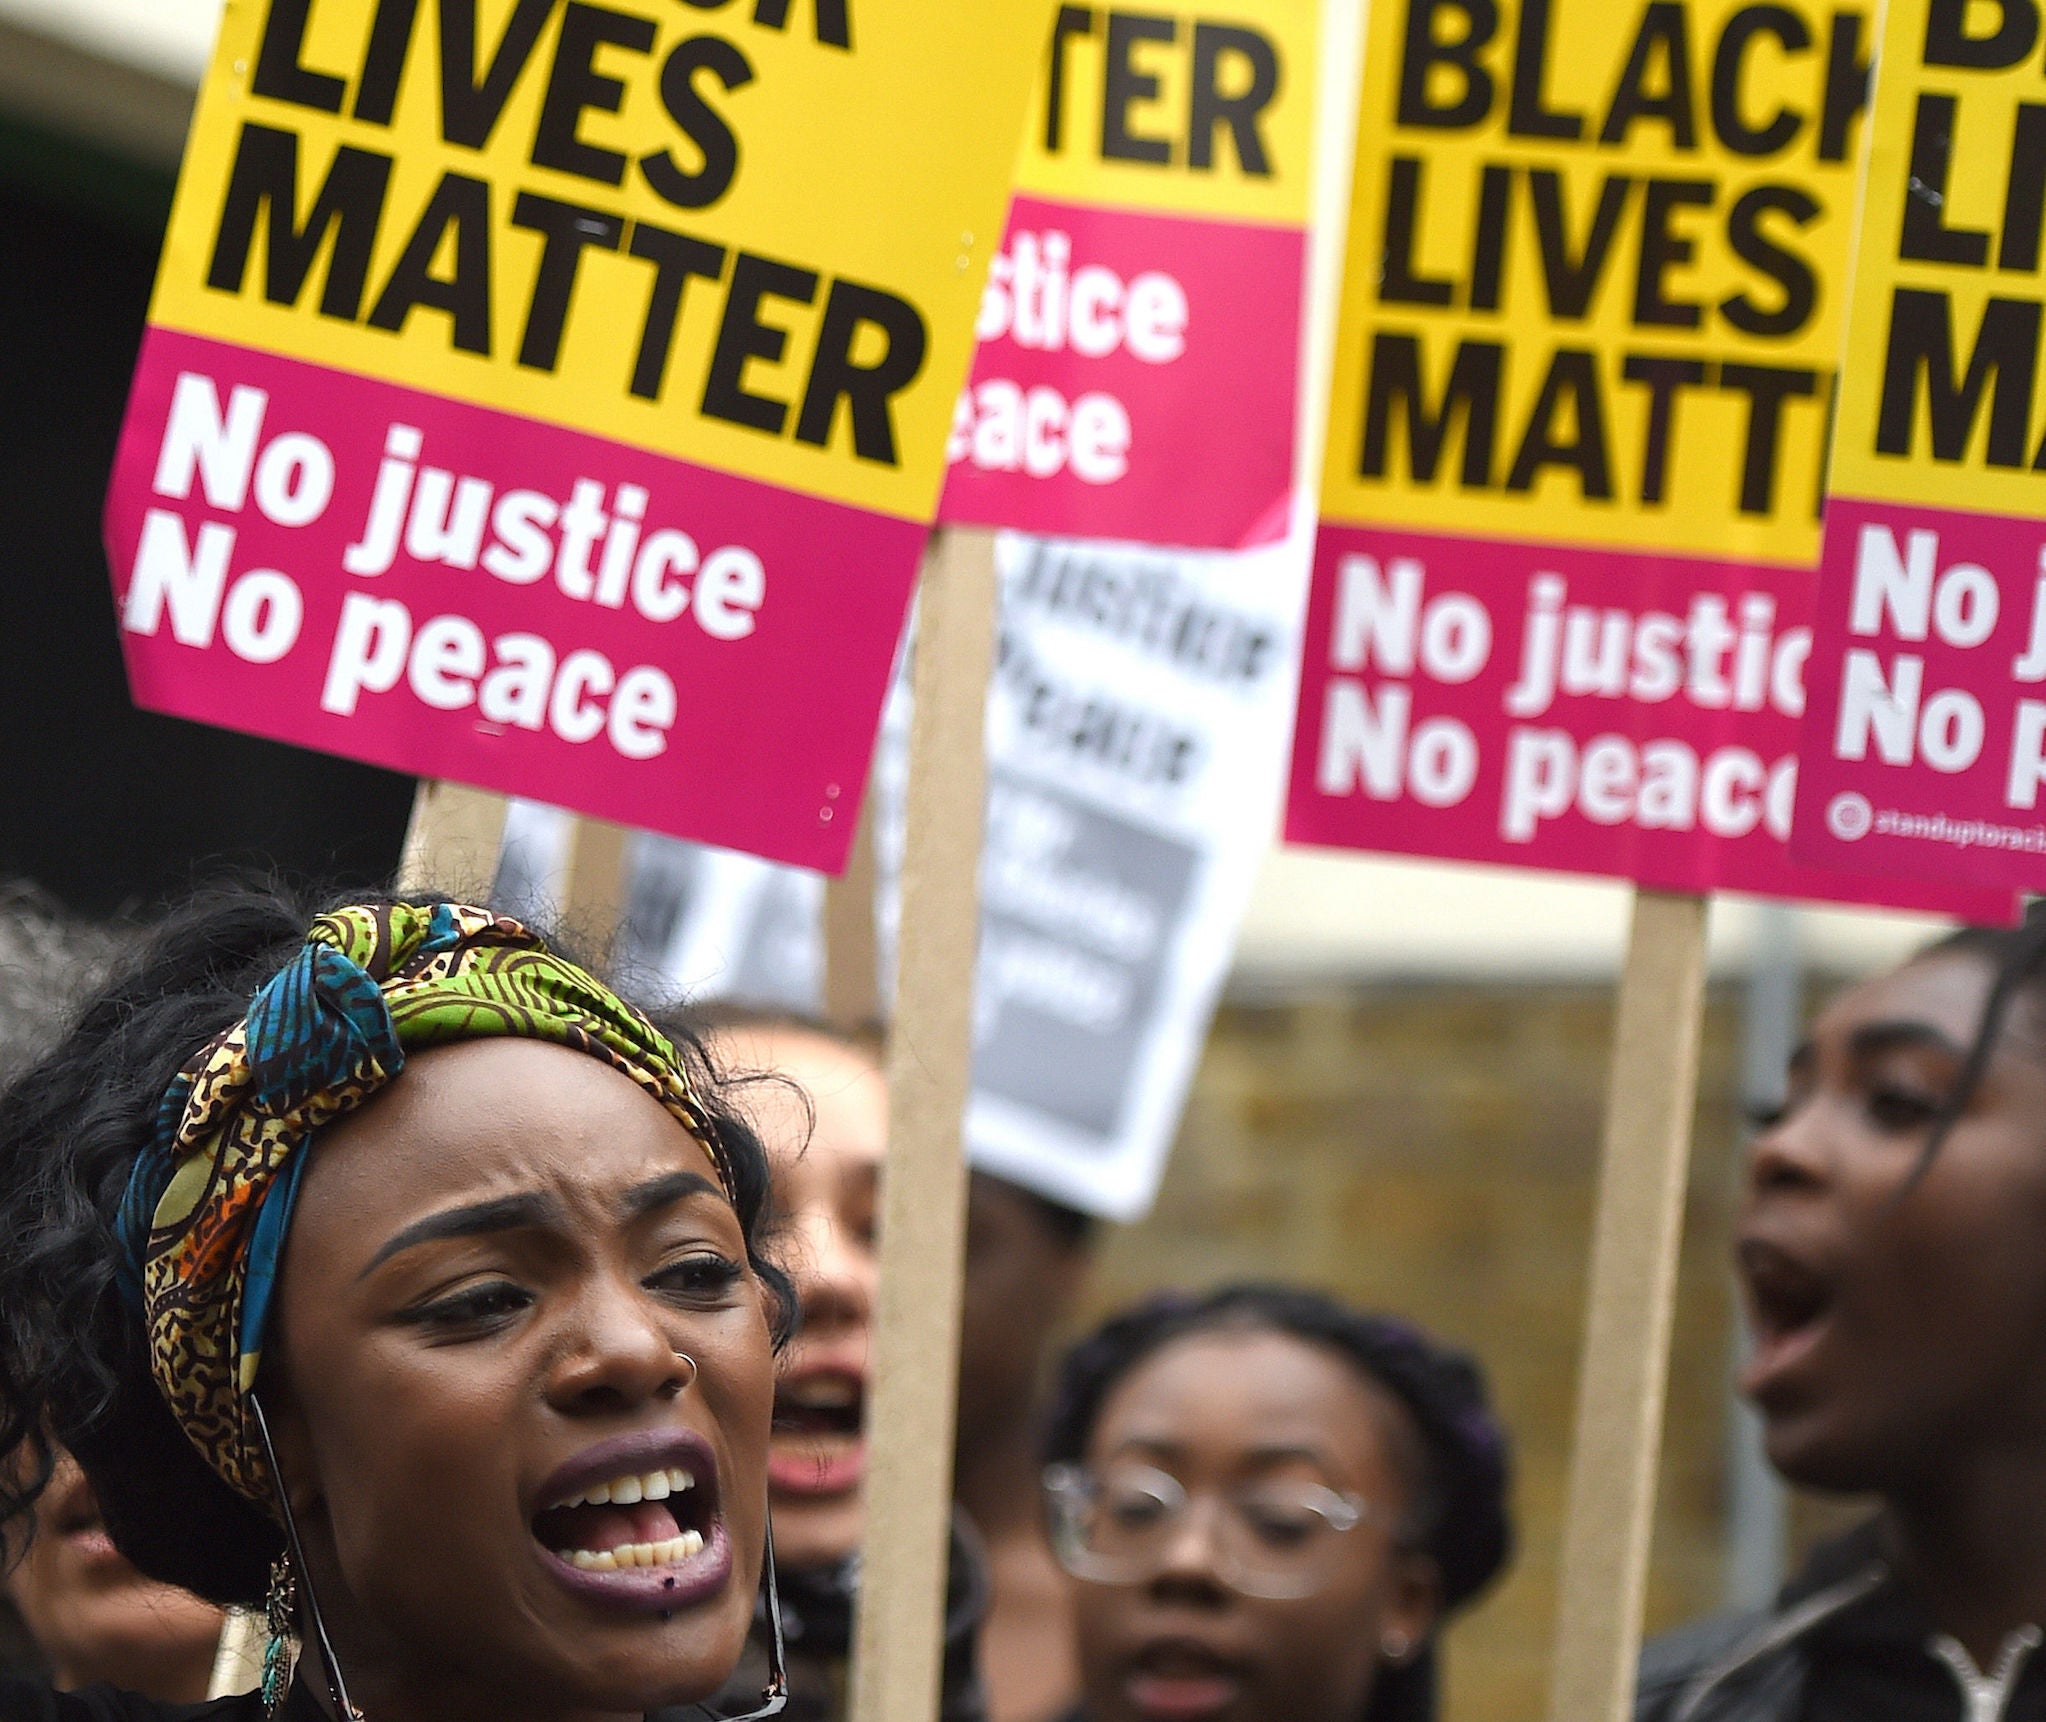 Protesters at an anti-racism demonstration in the UK